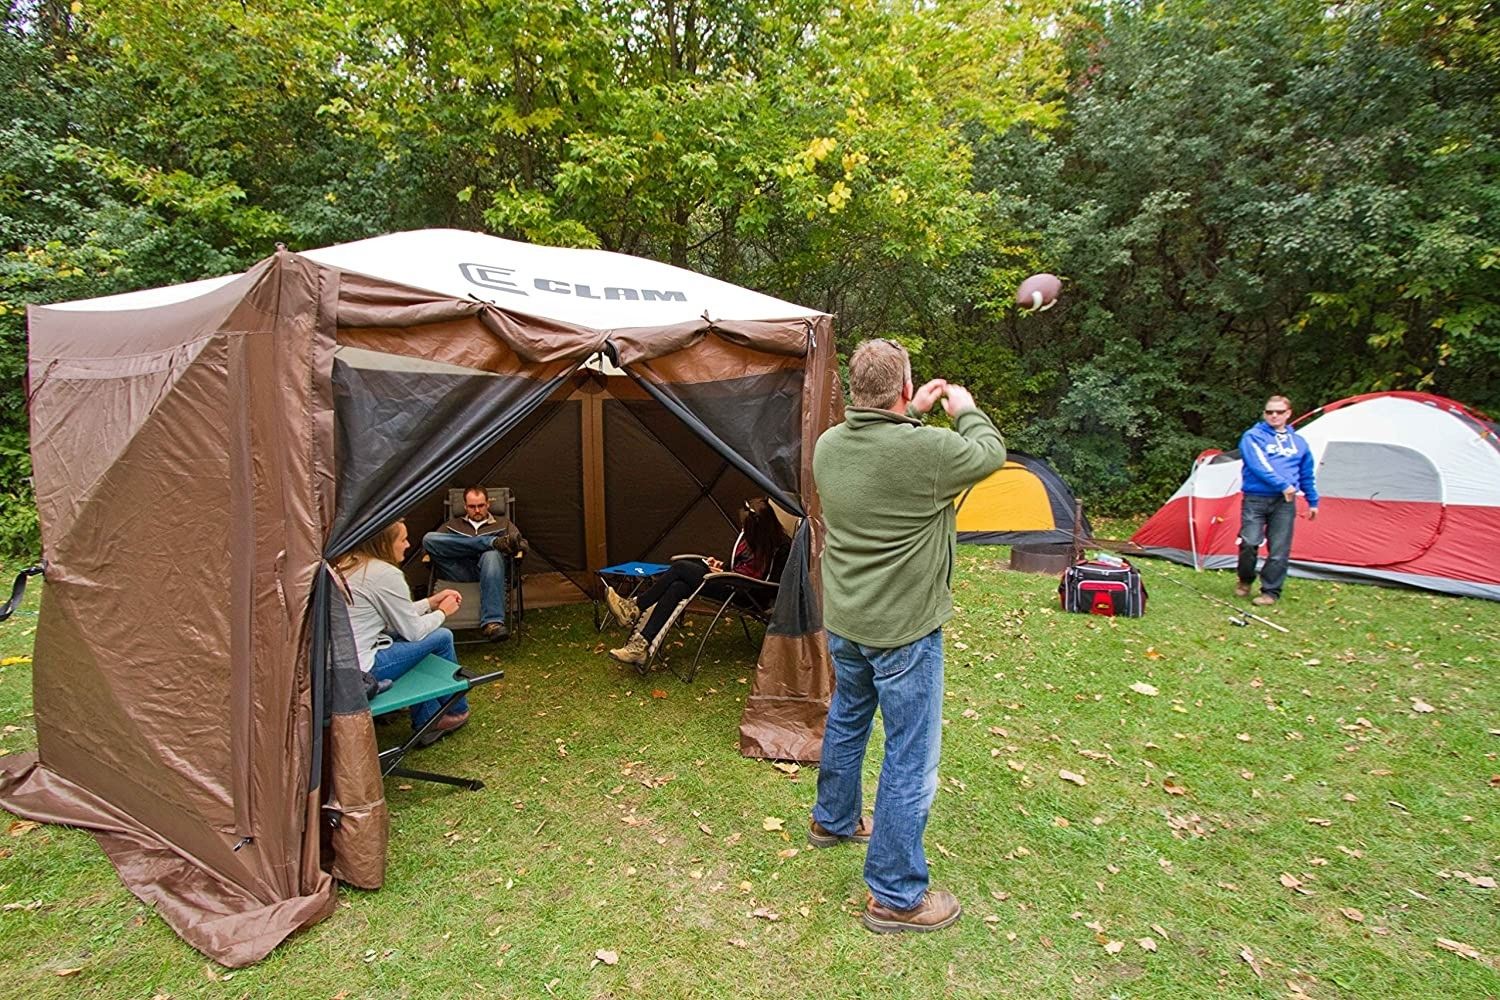 The Best Screen Tent Option filled with a group of people at a campsite